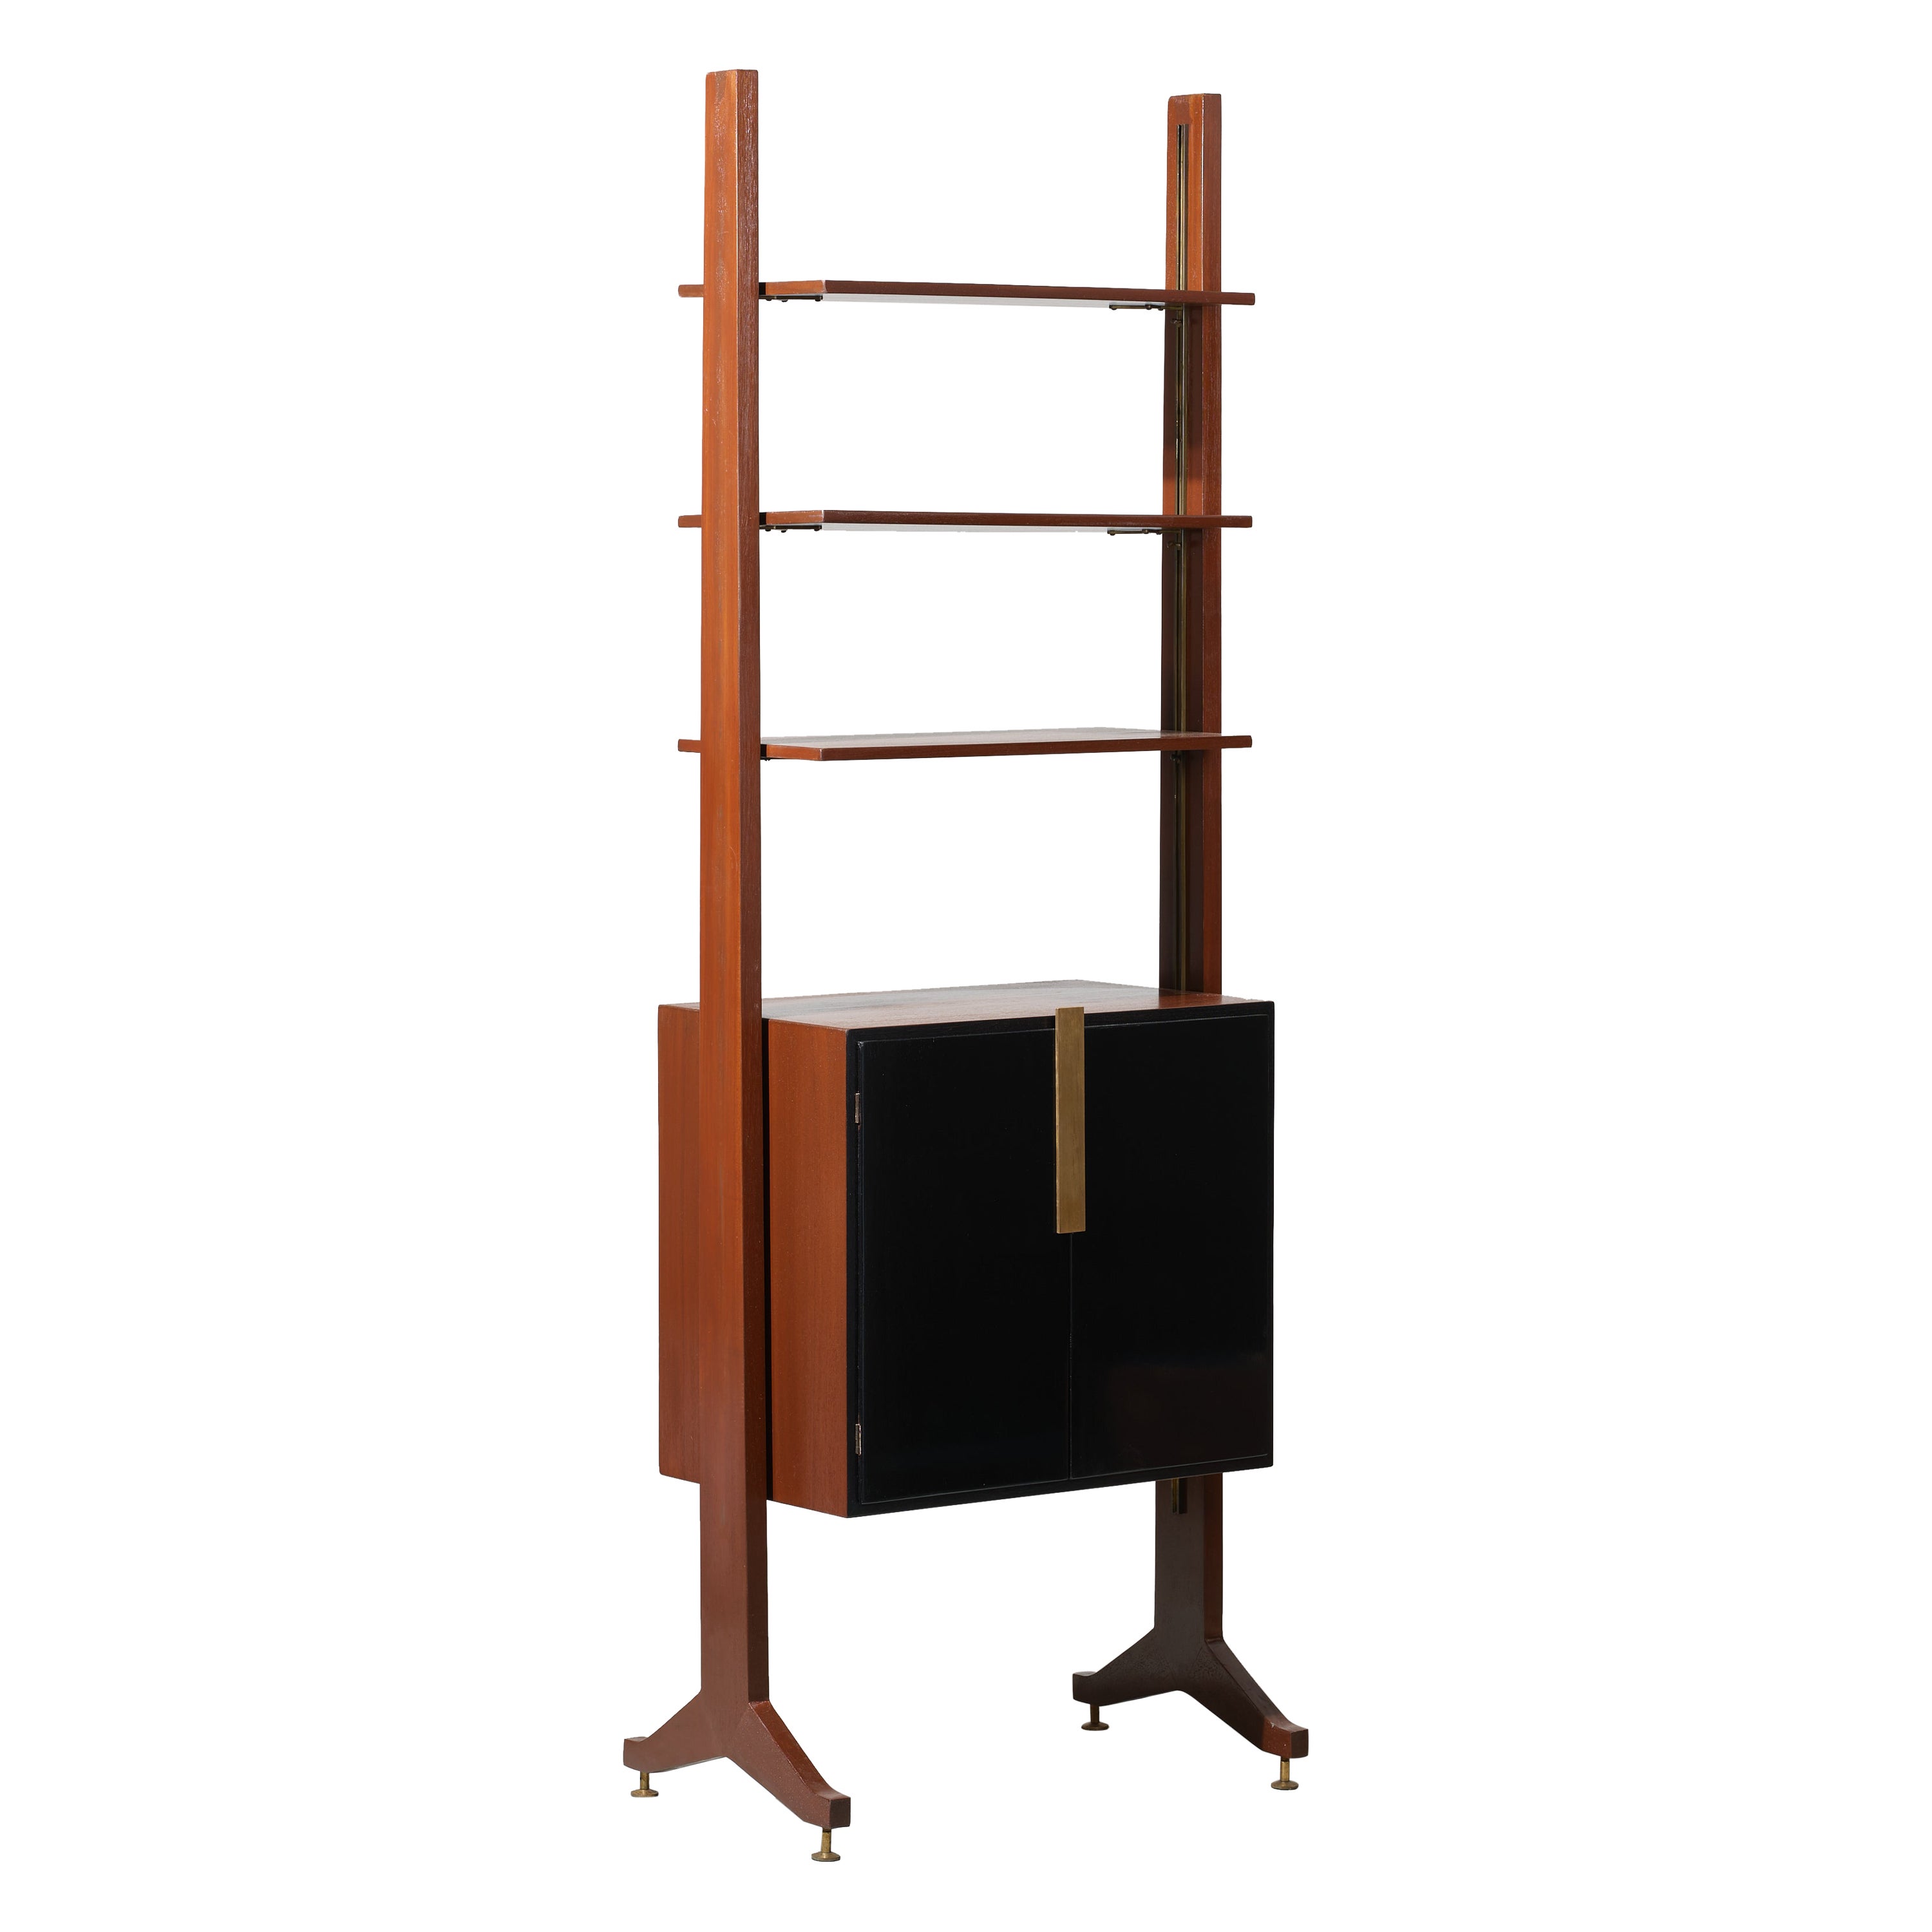 Italian Midcentury Modern Bookcase - Vintage 50s Design Restyled by RETRO4M For Sale